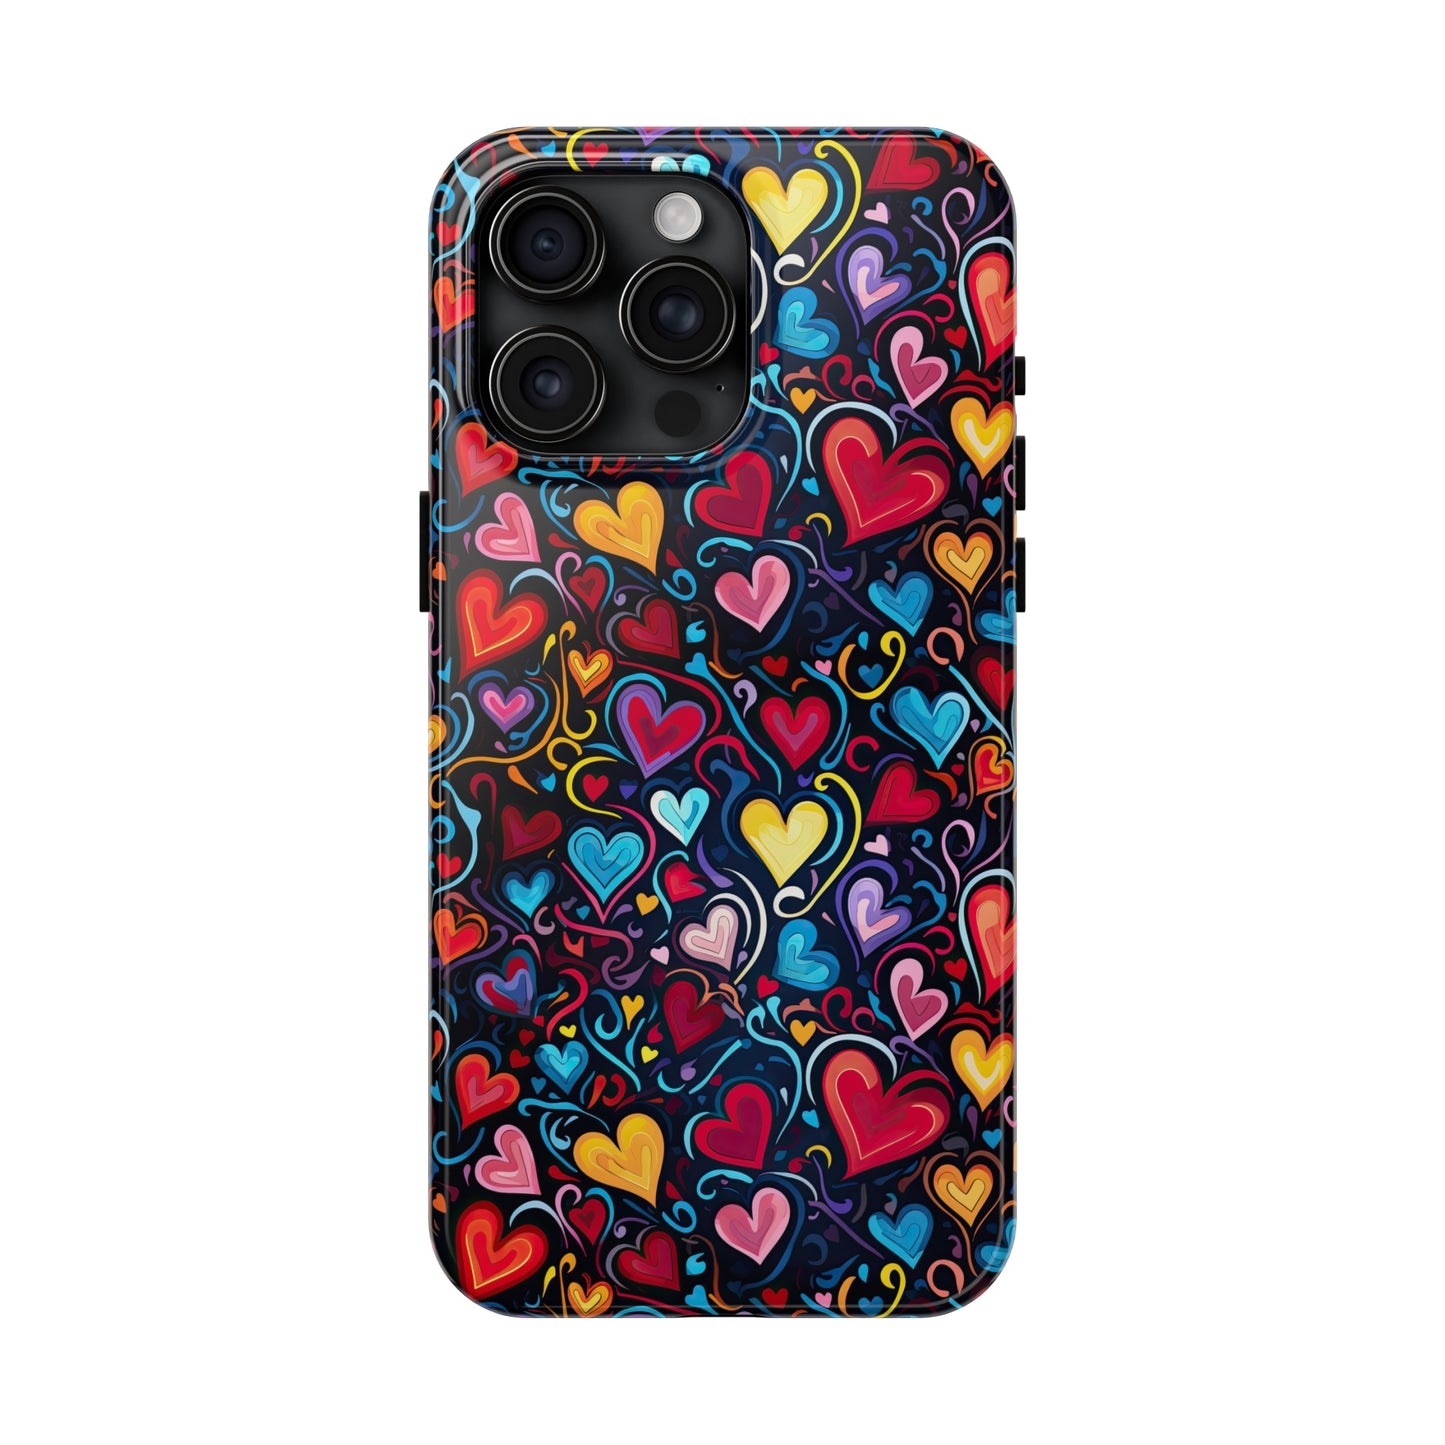 Whimsical Colorful Heart Design Iphone Tough Phone Case